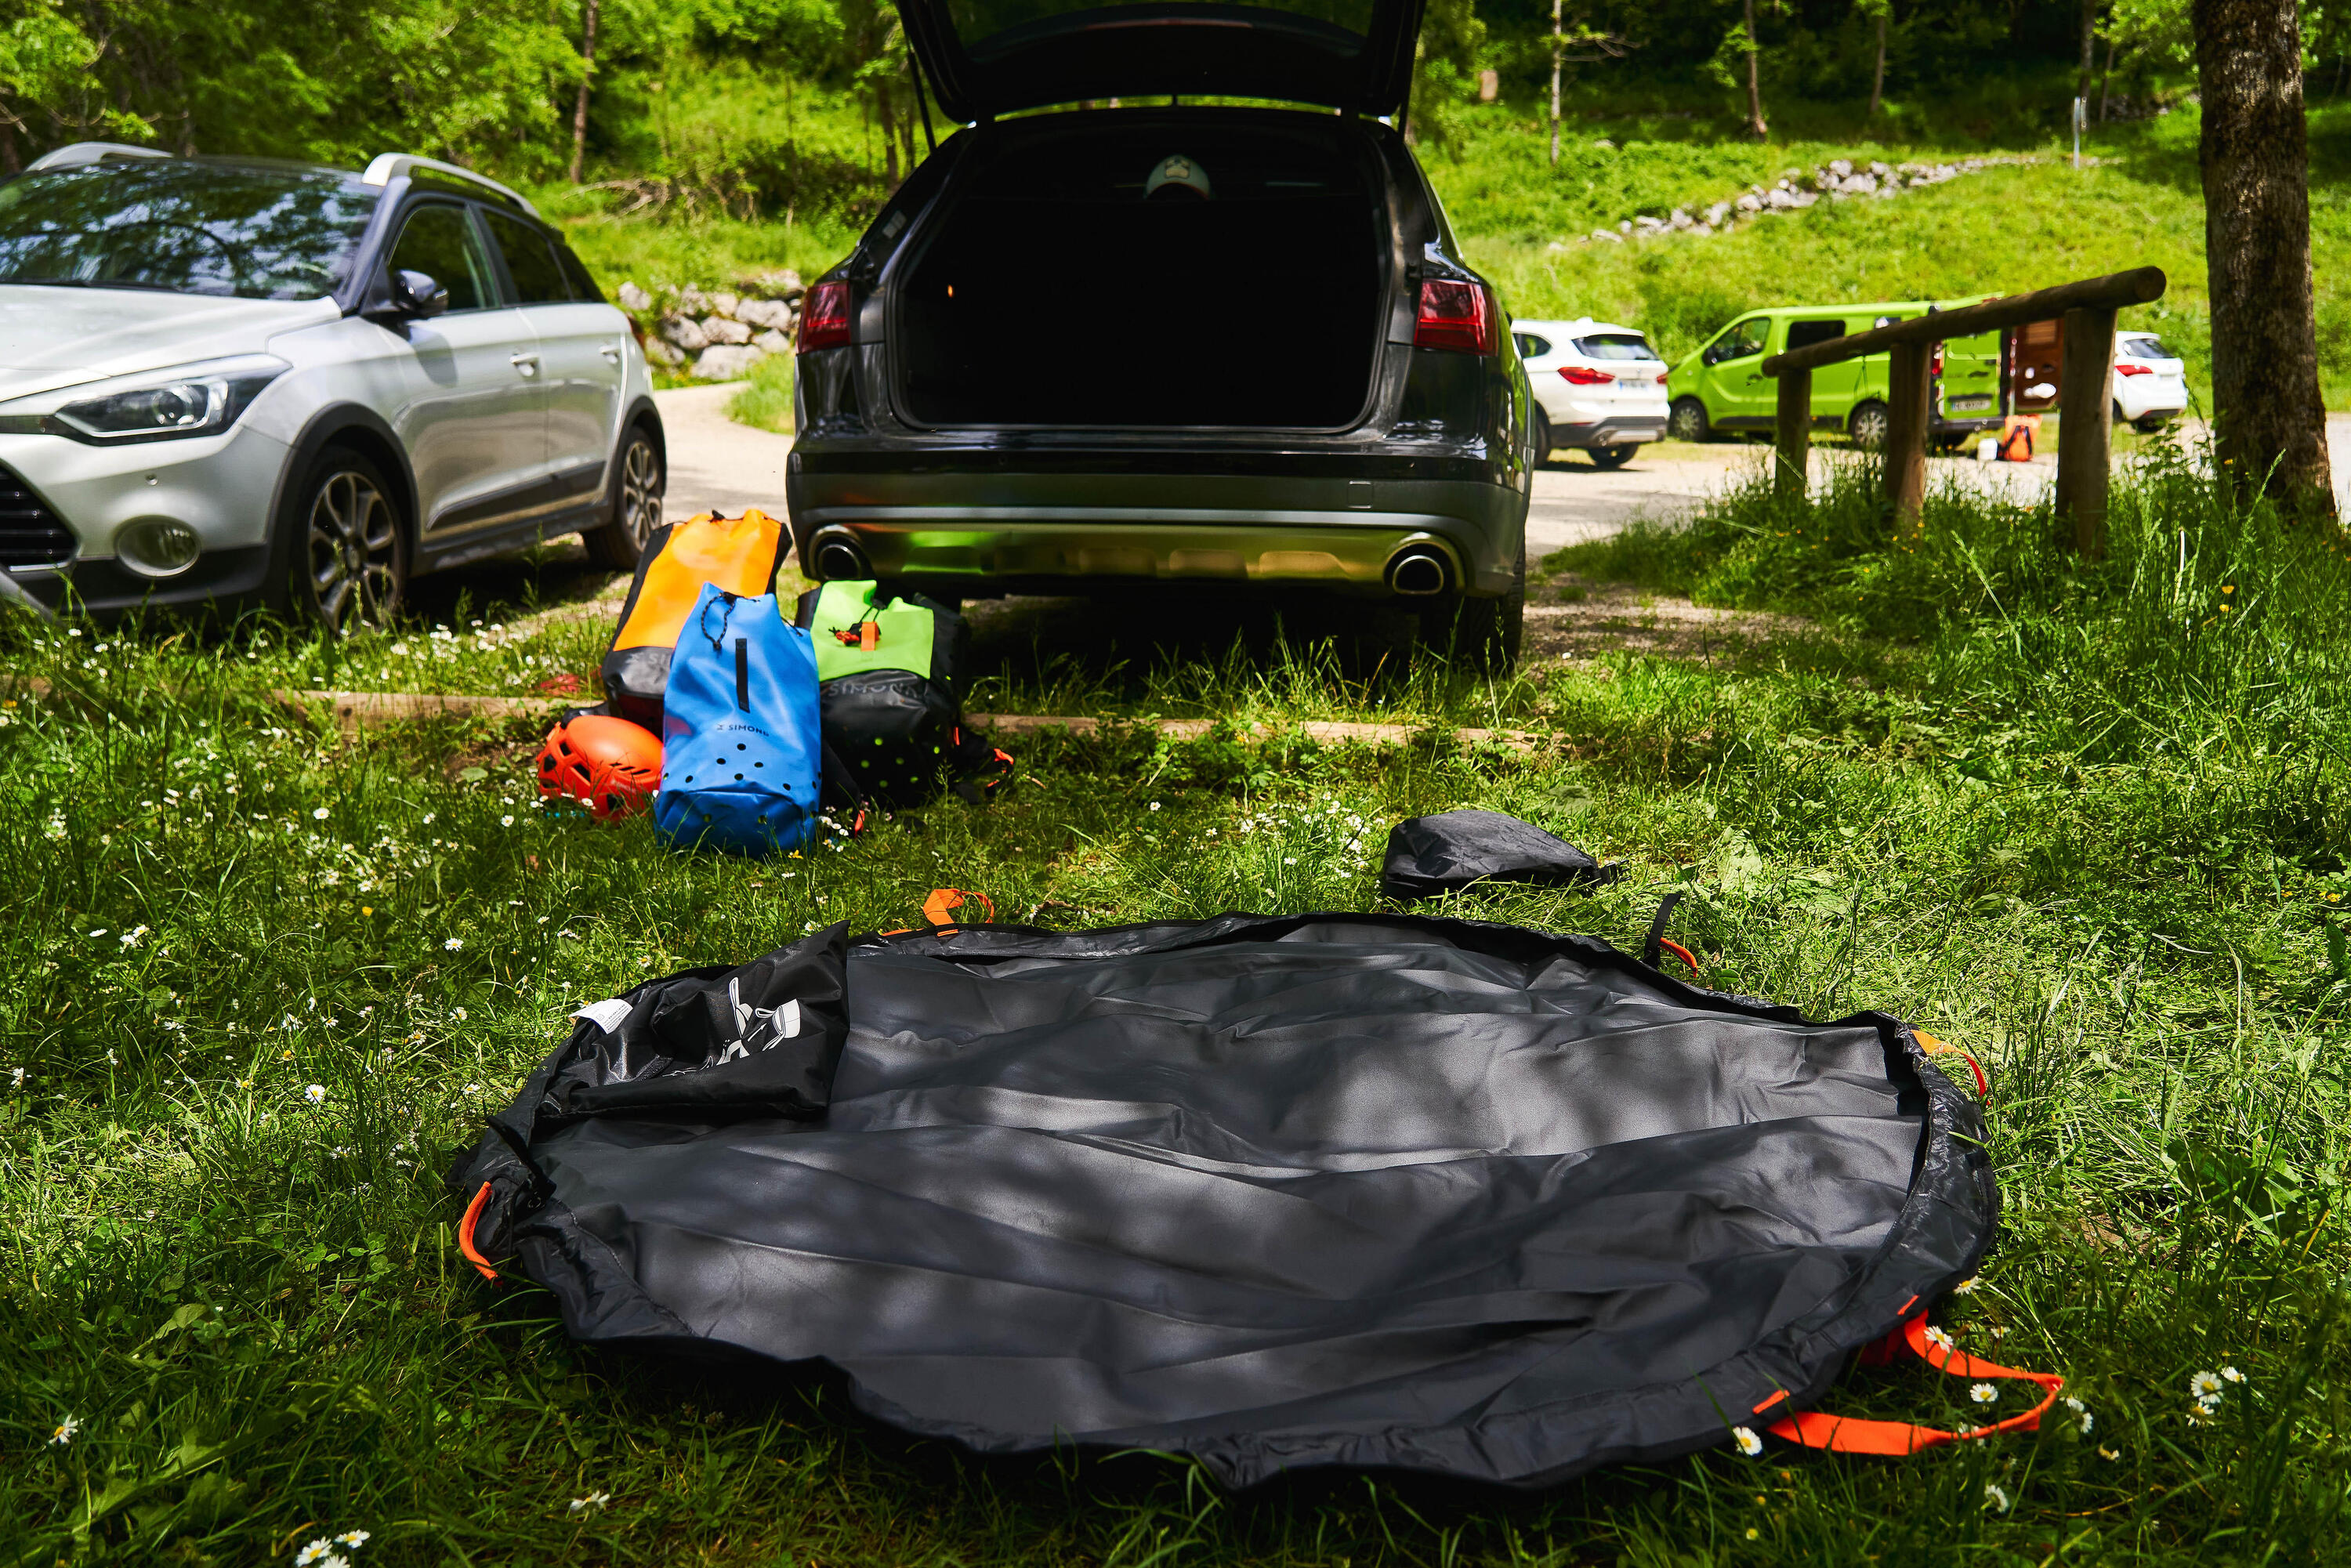 Canyoning gear and wetsuit bag 8/10